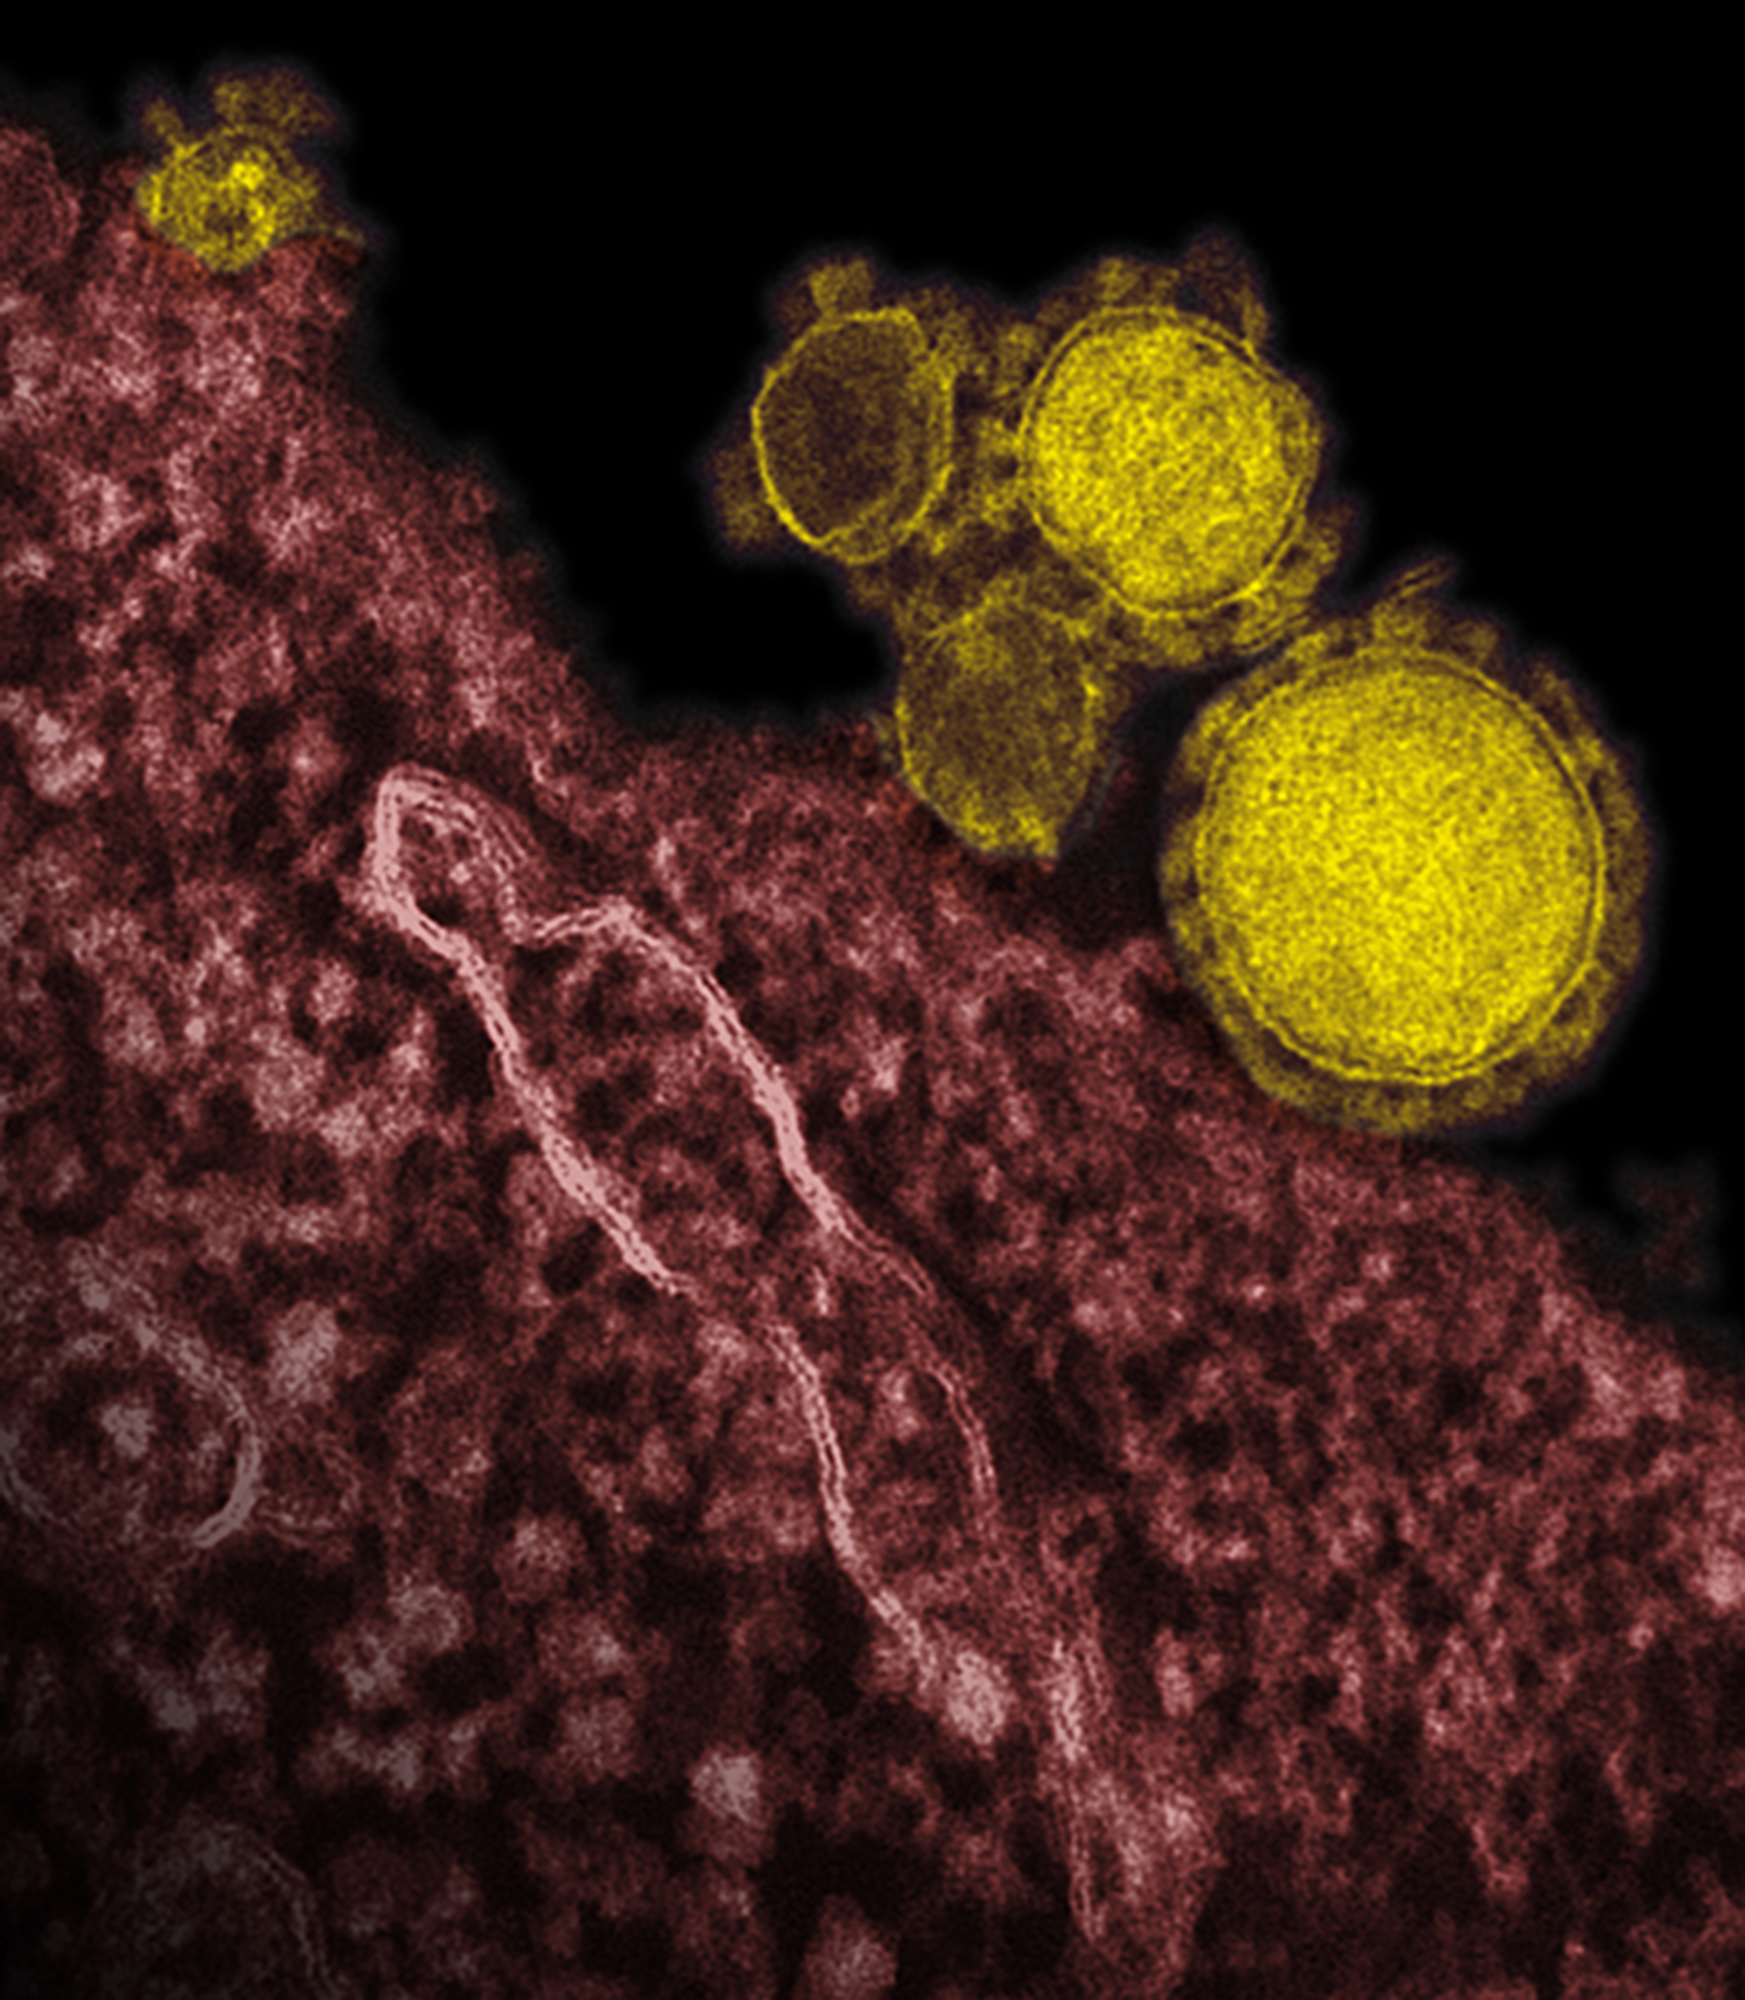 This undated file electron microscope image made available by the National Institute of Allergy and Infectious Diseases - Rocky Mountain Laboratories shows novel coronavirus particles, also known as the MERS virus, colorized in yellow.